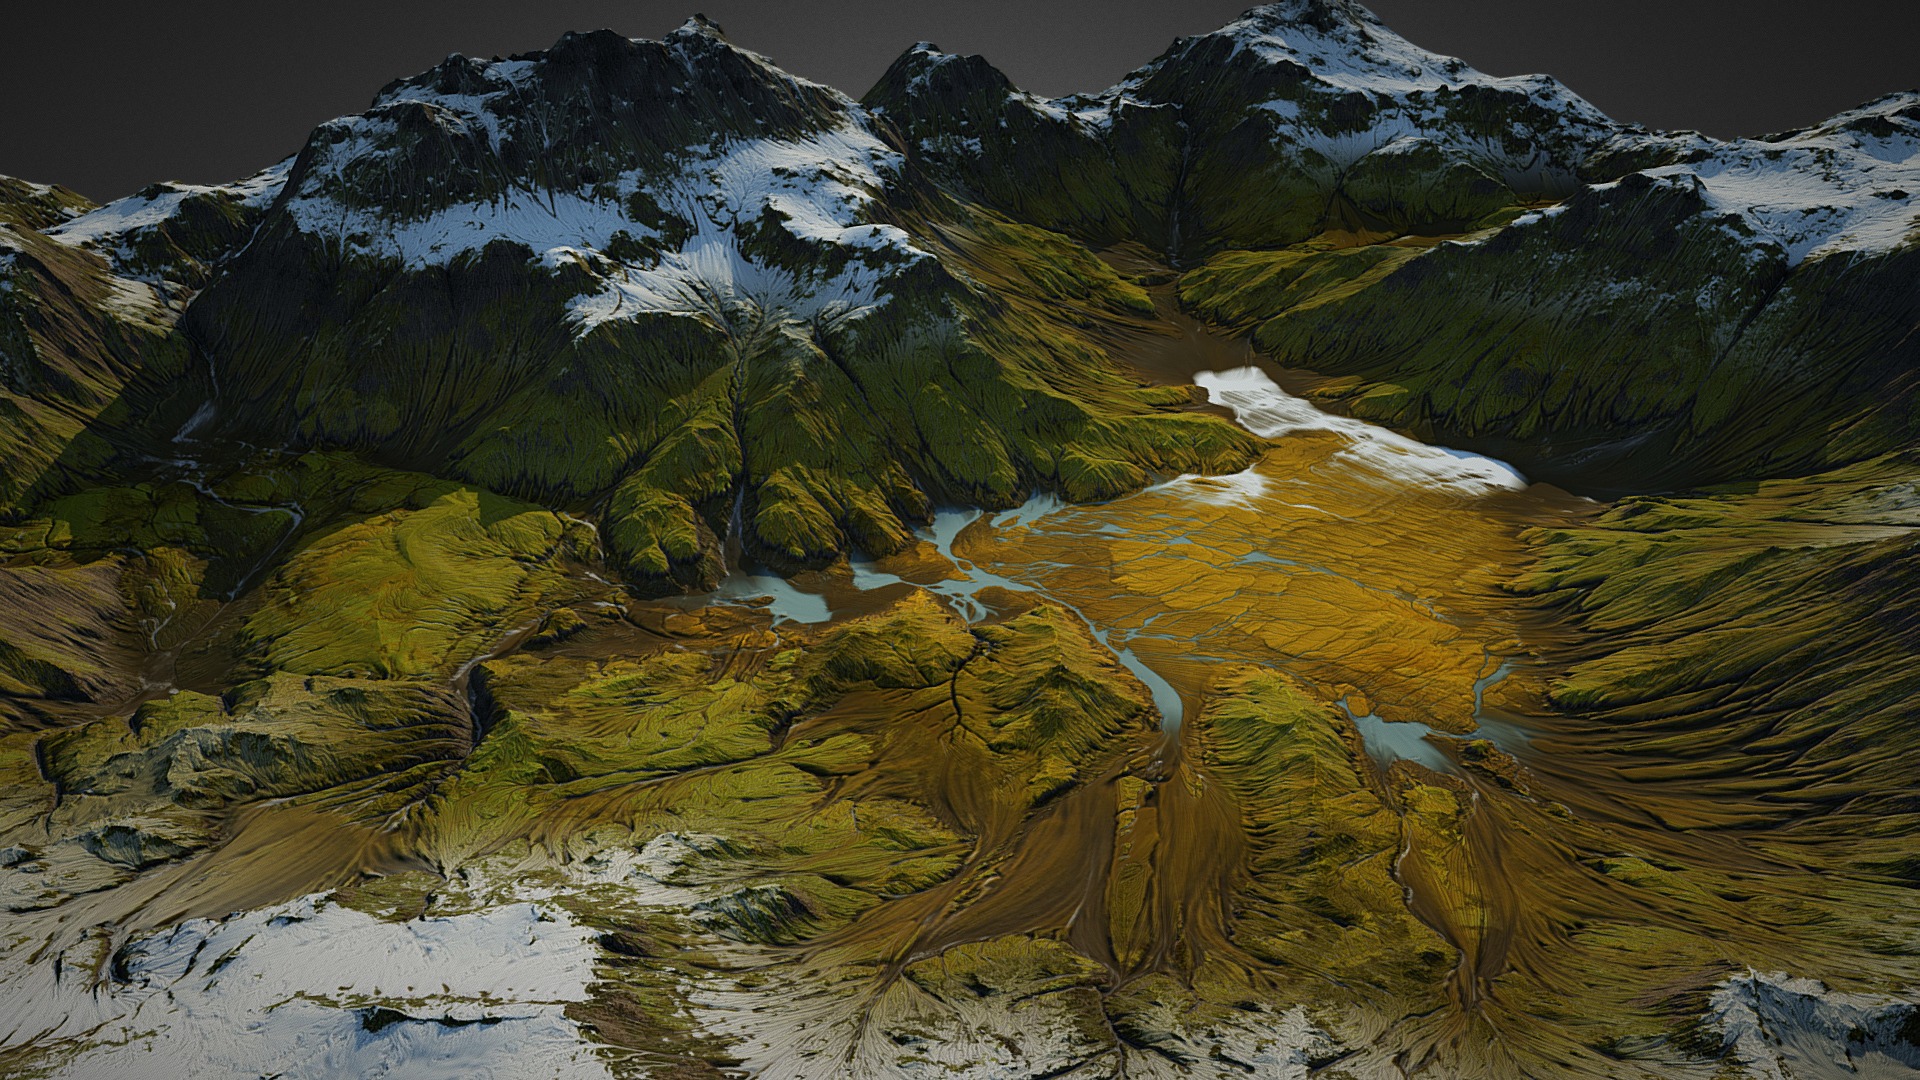 3D model Iceland landscape (World Machine) - This is a 3D model of the Iceland landscape (World Machine). The 3D model is about a river running through a snowy mountainous region.